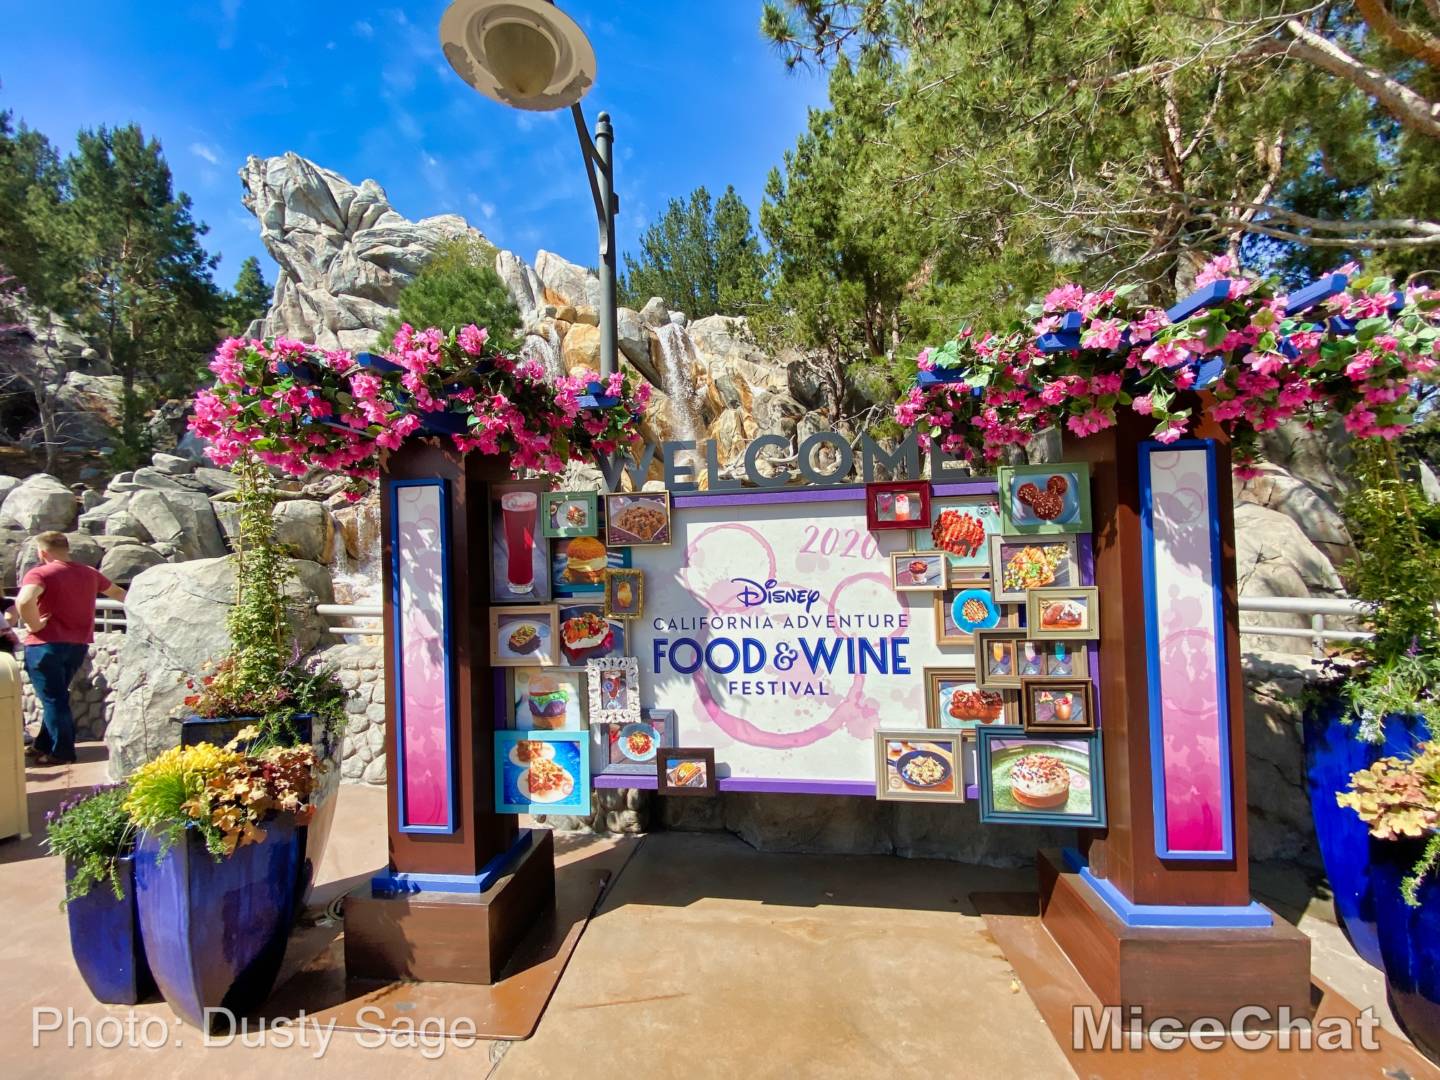 , Breaking News &#8211; Food &#038; Beverage Event Planned for Disney California Adventure